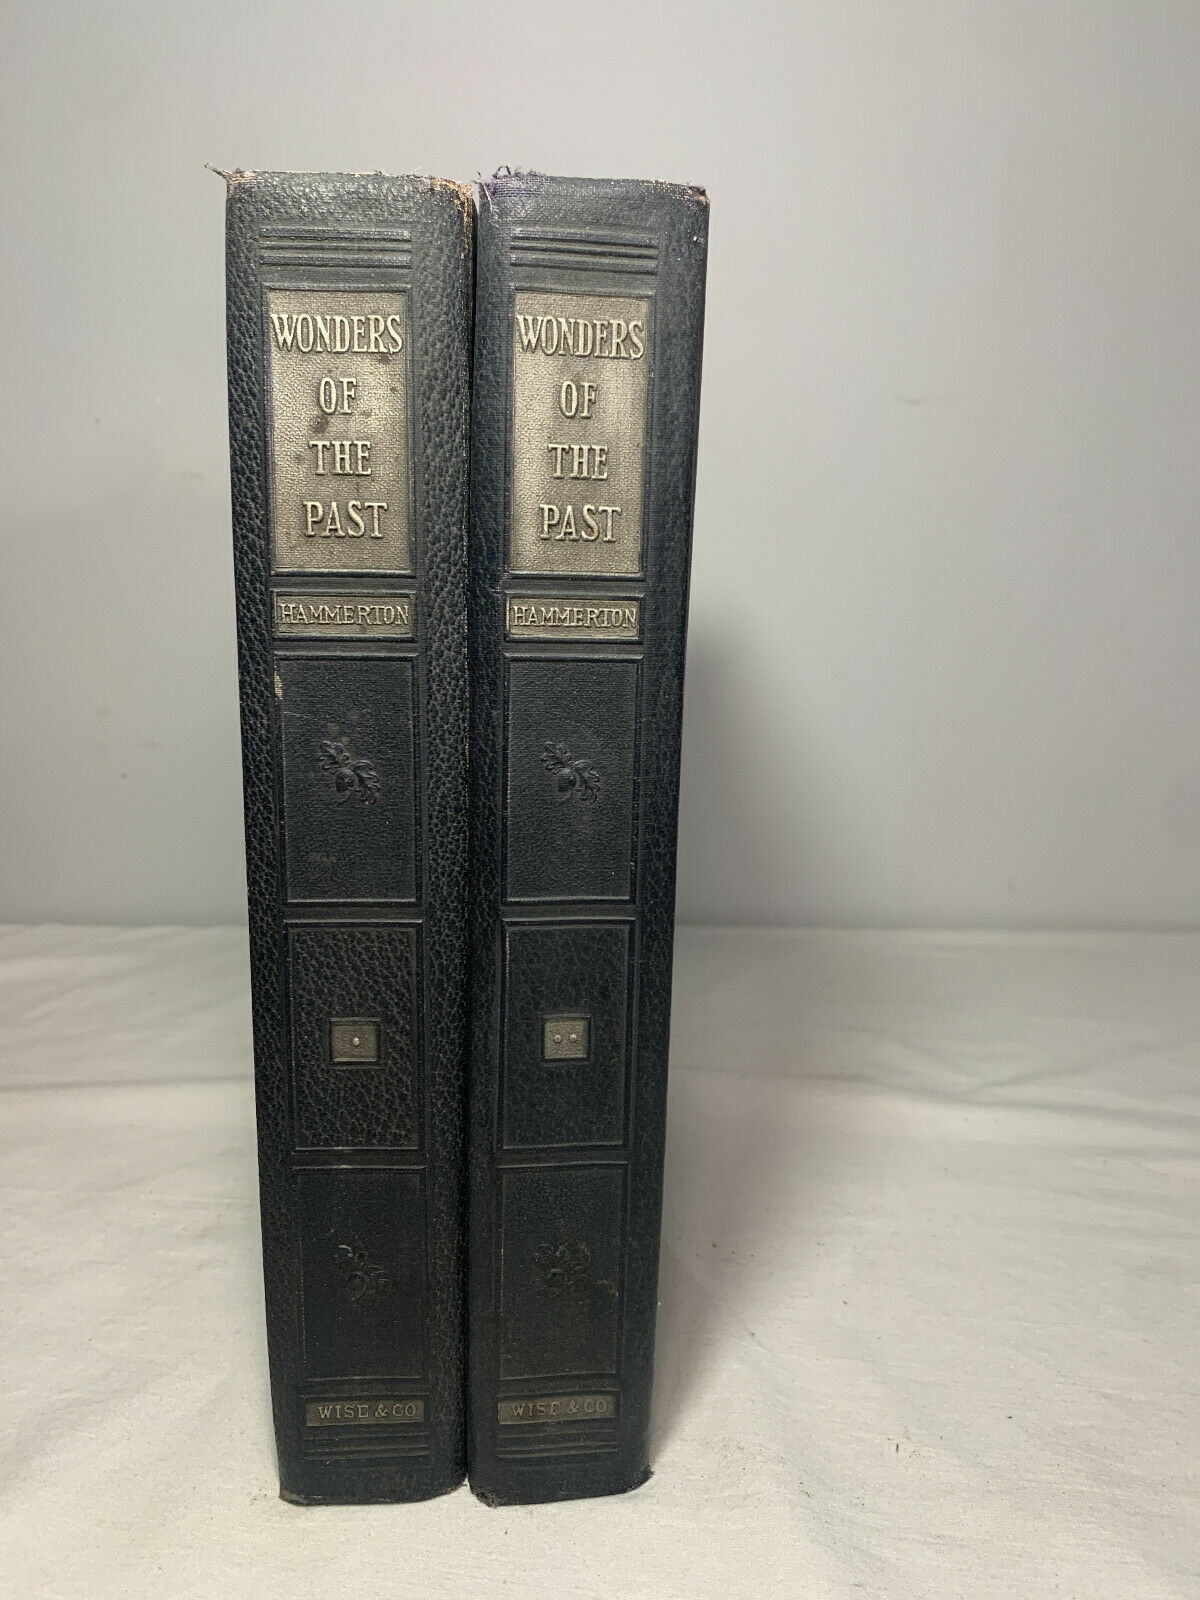 Wonders Of The Past Vol 1 & 2 By Hammerton 1937 Edition   (A1)